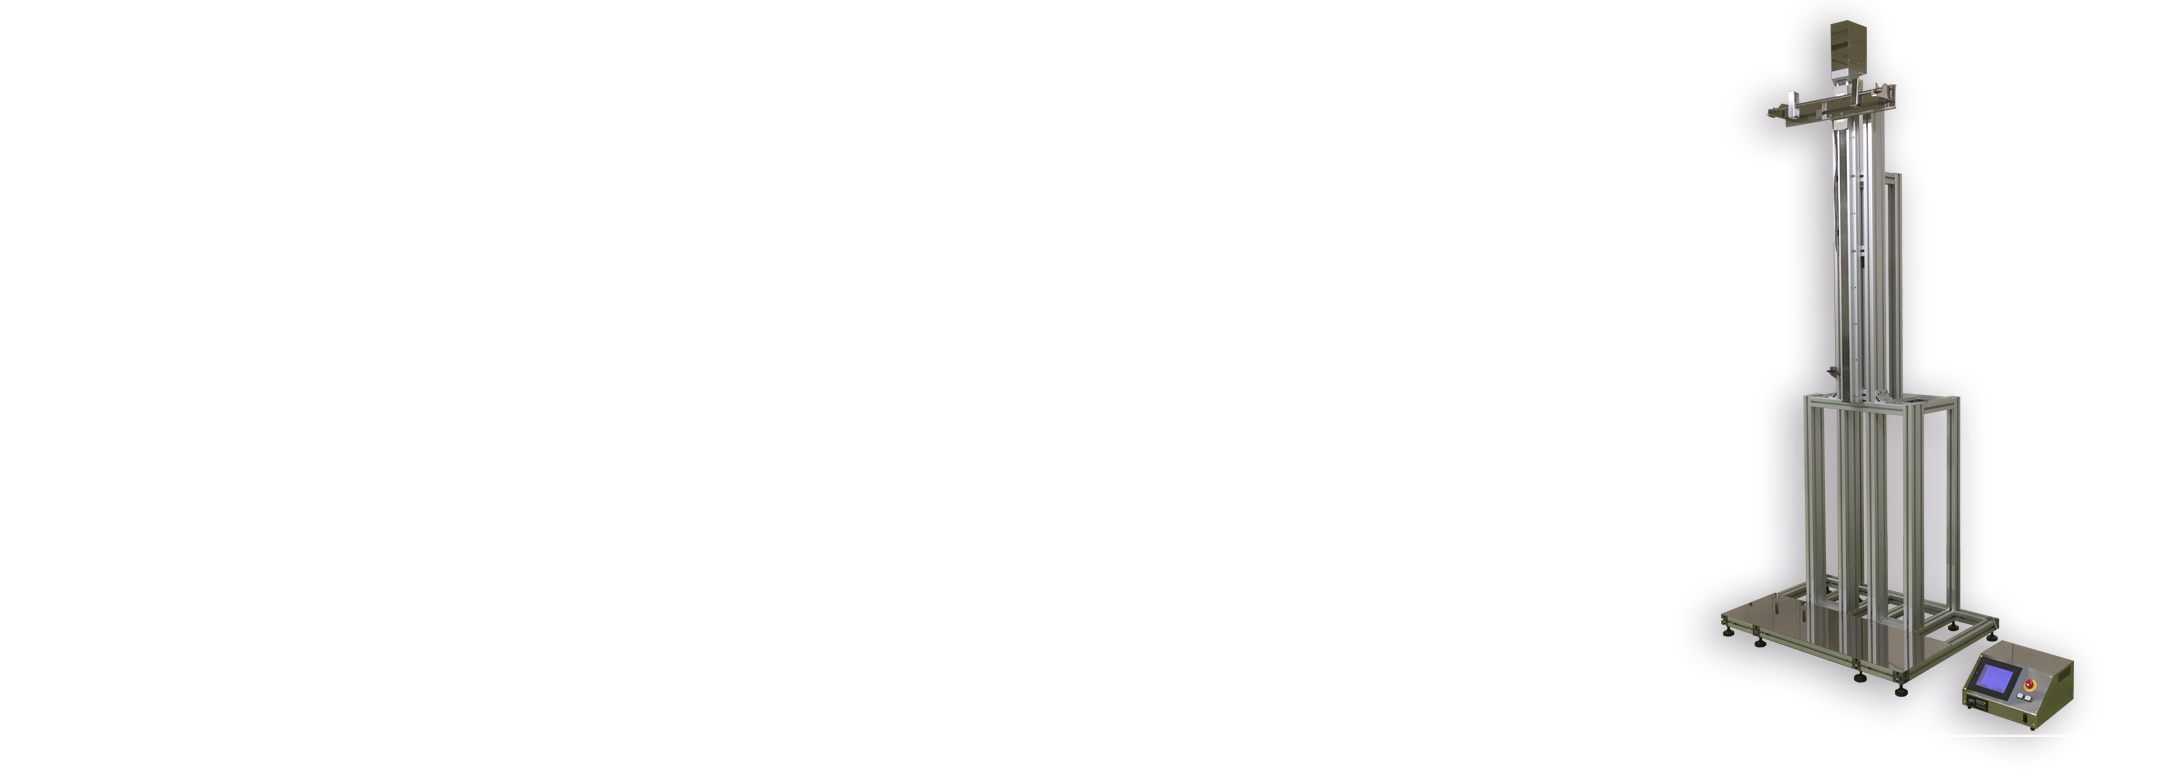 Desk Top Type dipcoater for Big Size Objects use DT-1508-S1